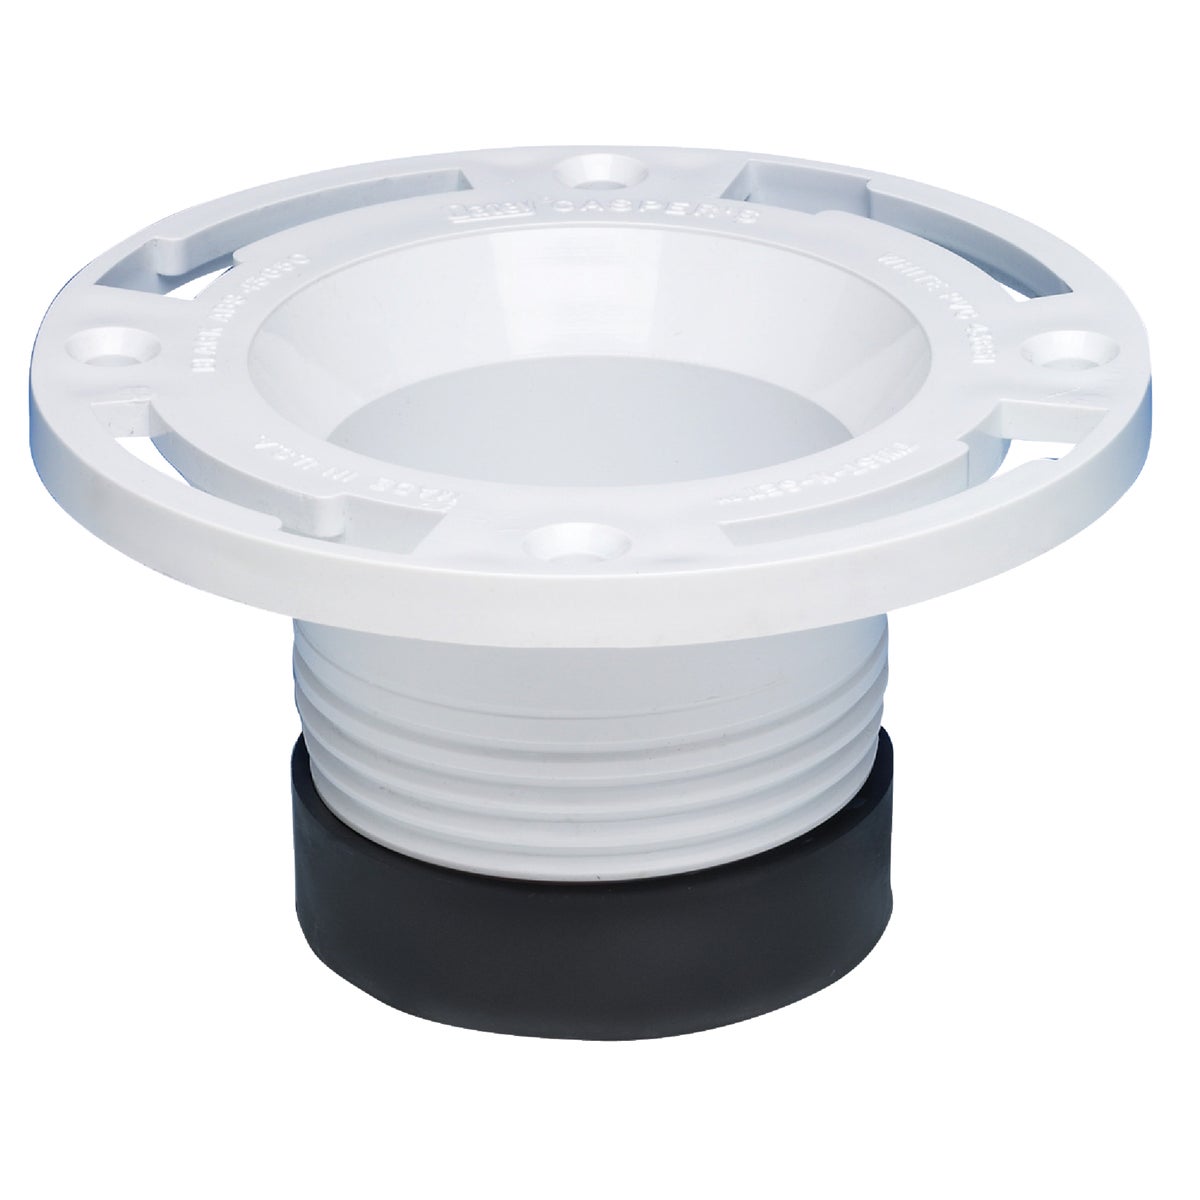 Item 460443, PVC replacement flange that easily installs with no tools and without 